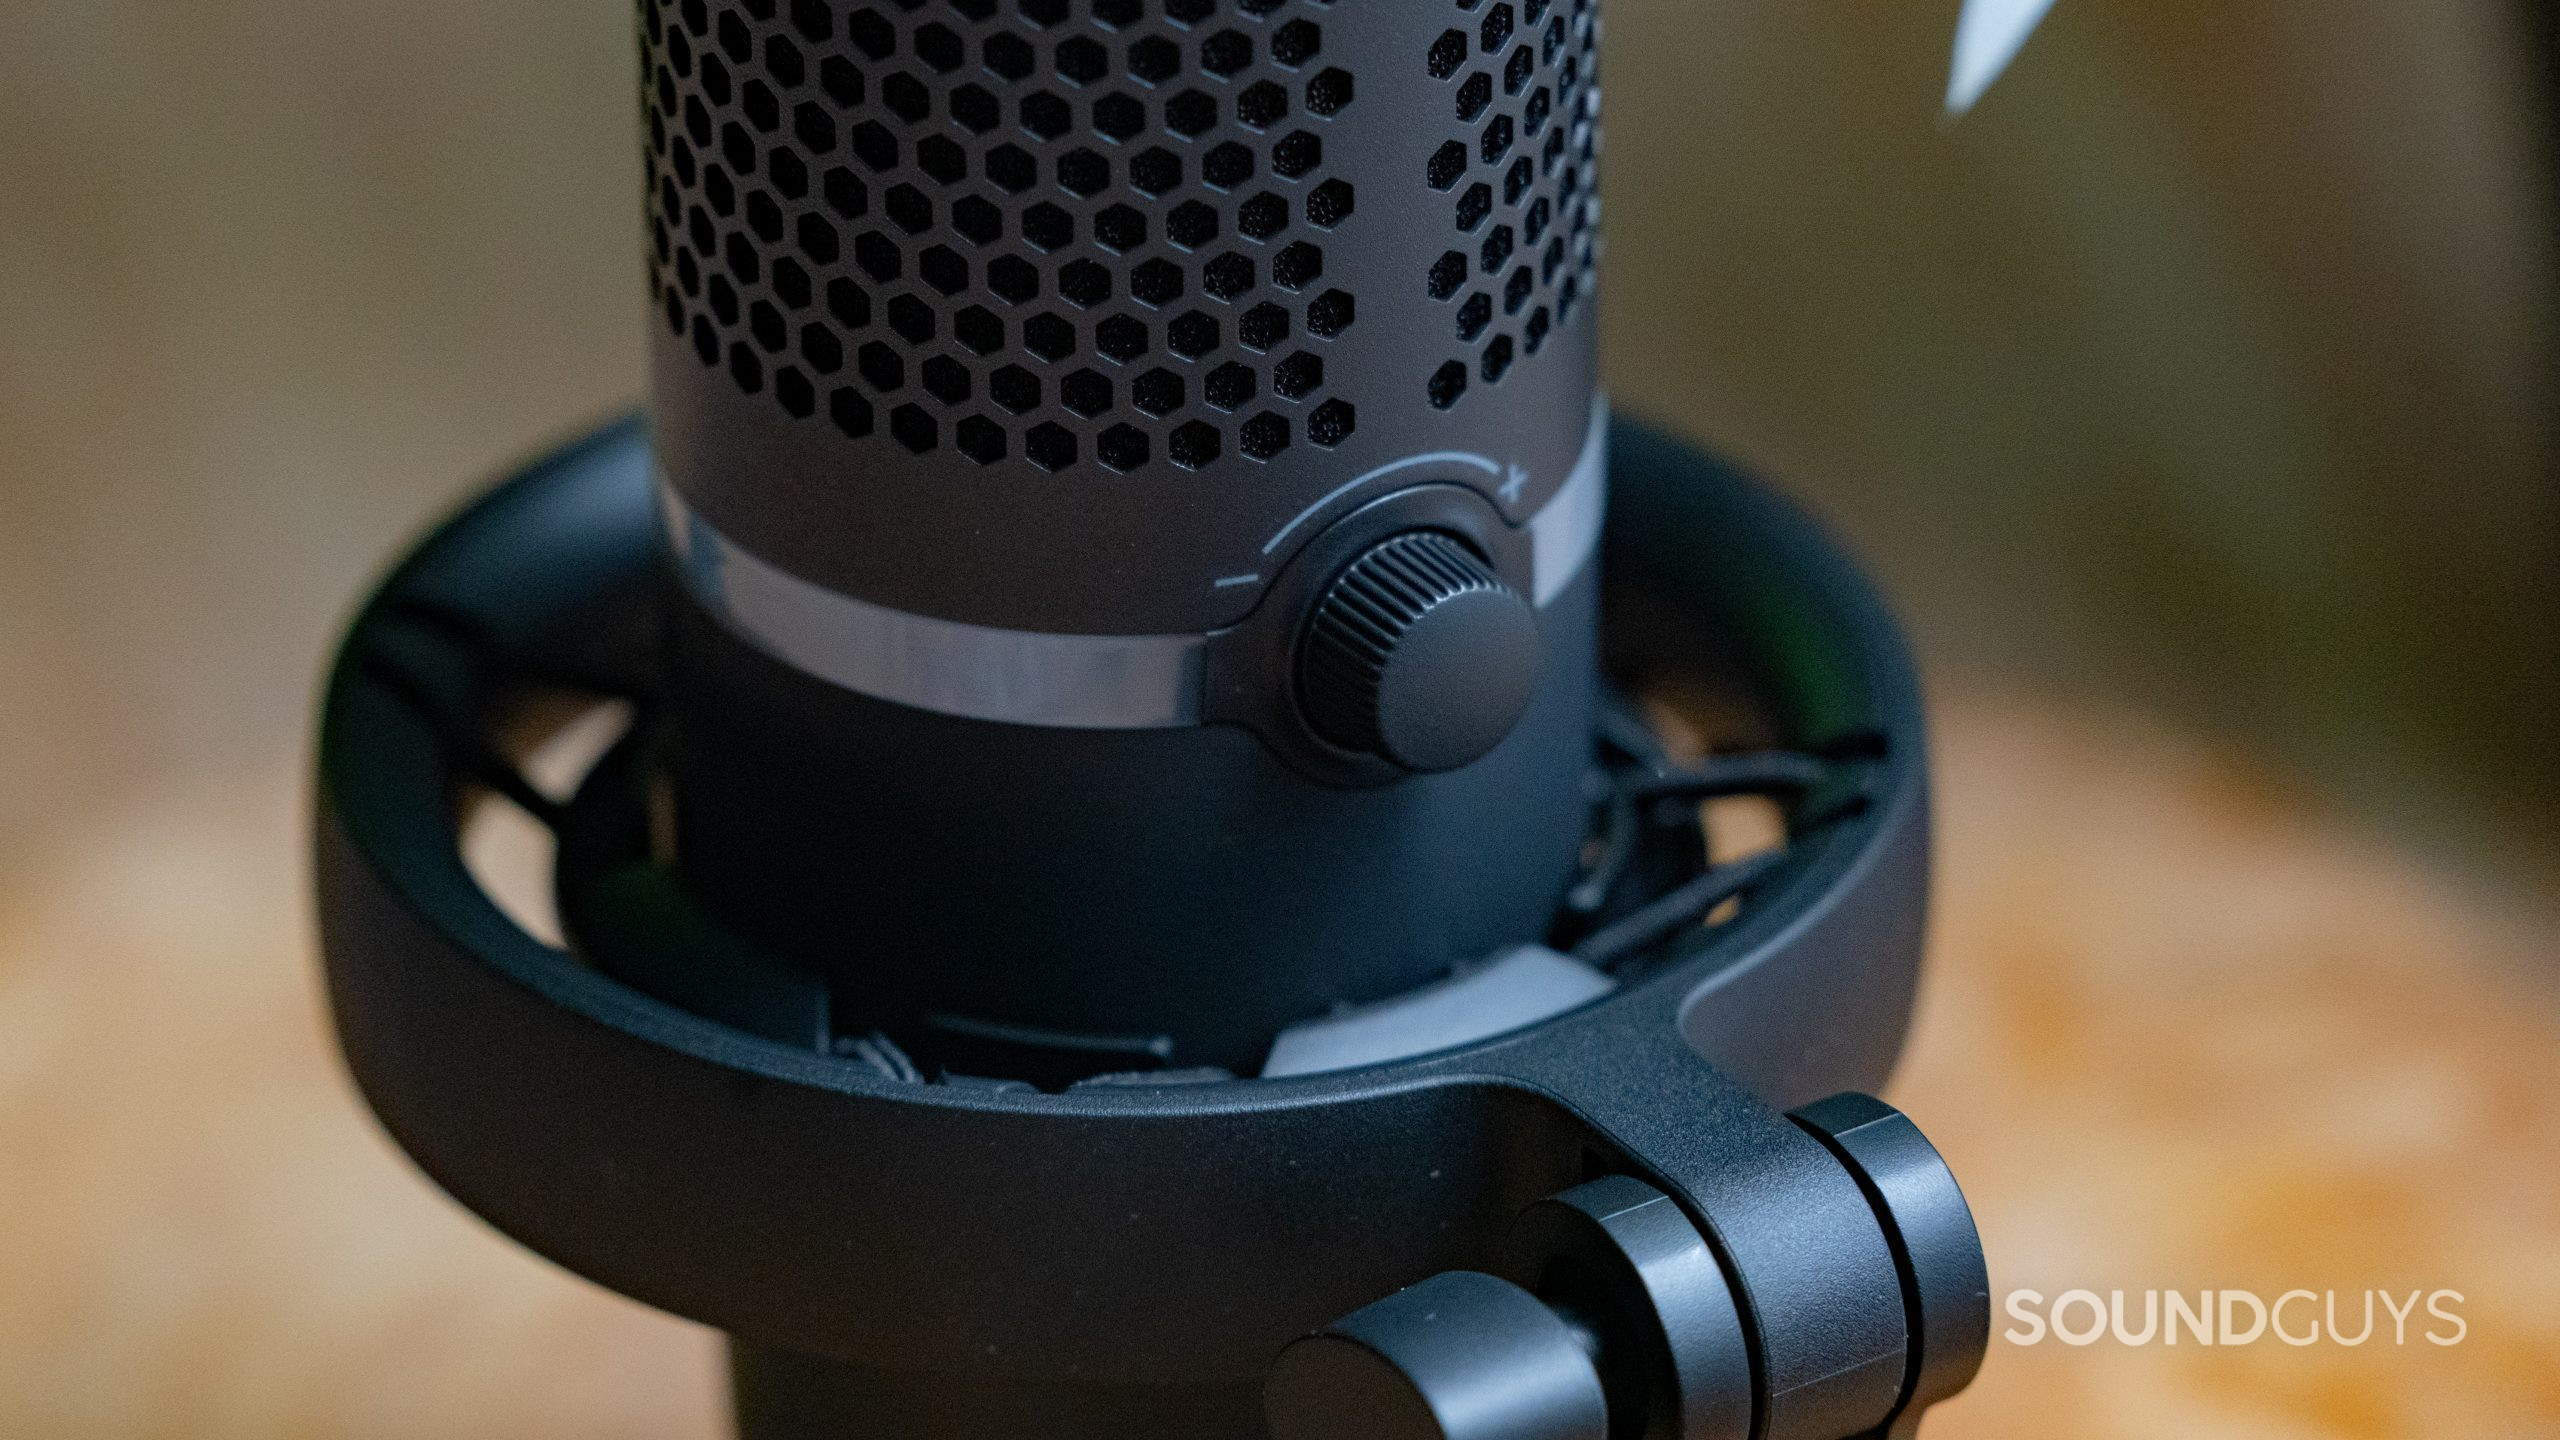 A close up of the HyperX DuoCast's volume knob and mounting system with a wooden table in the background.